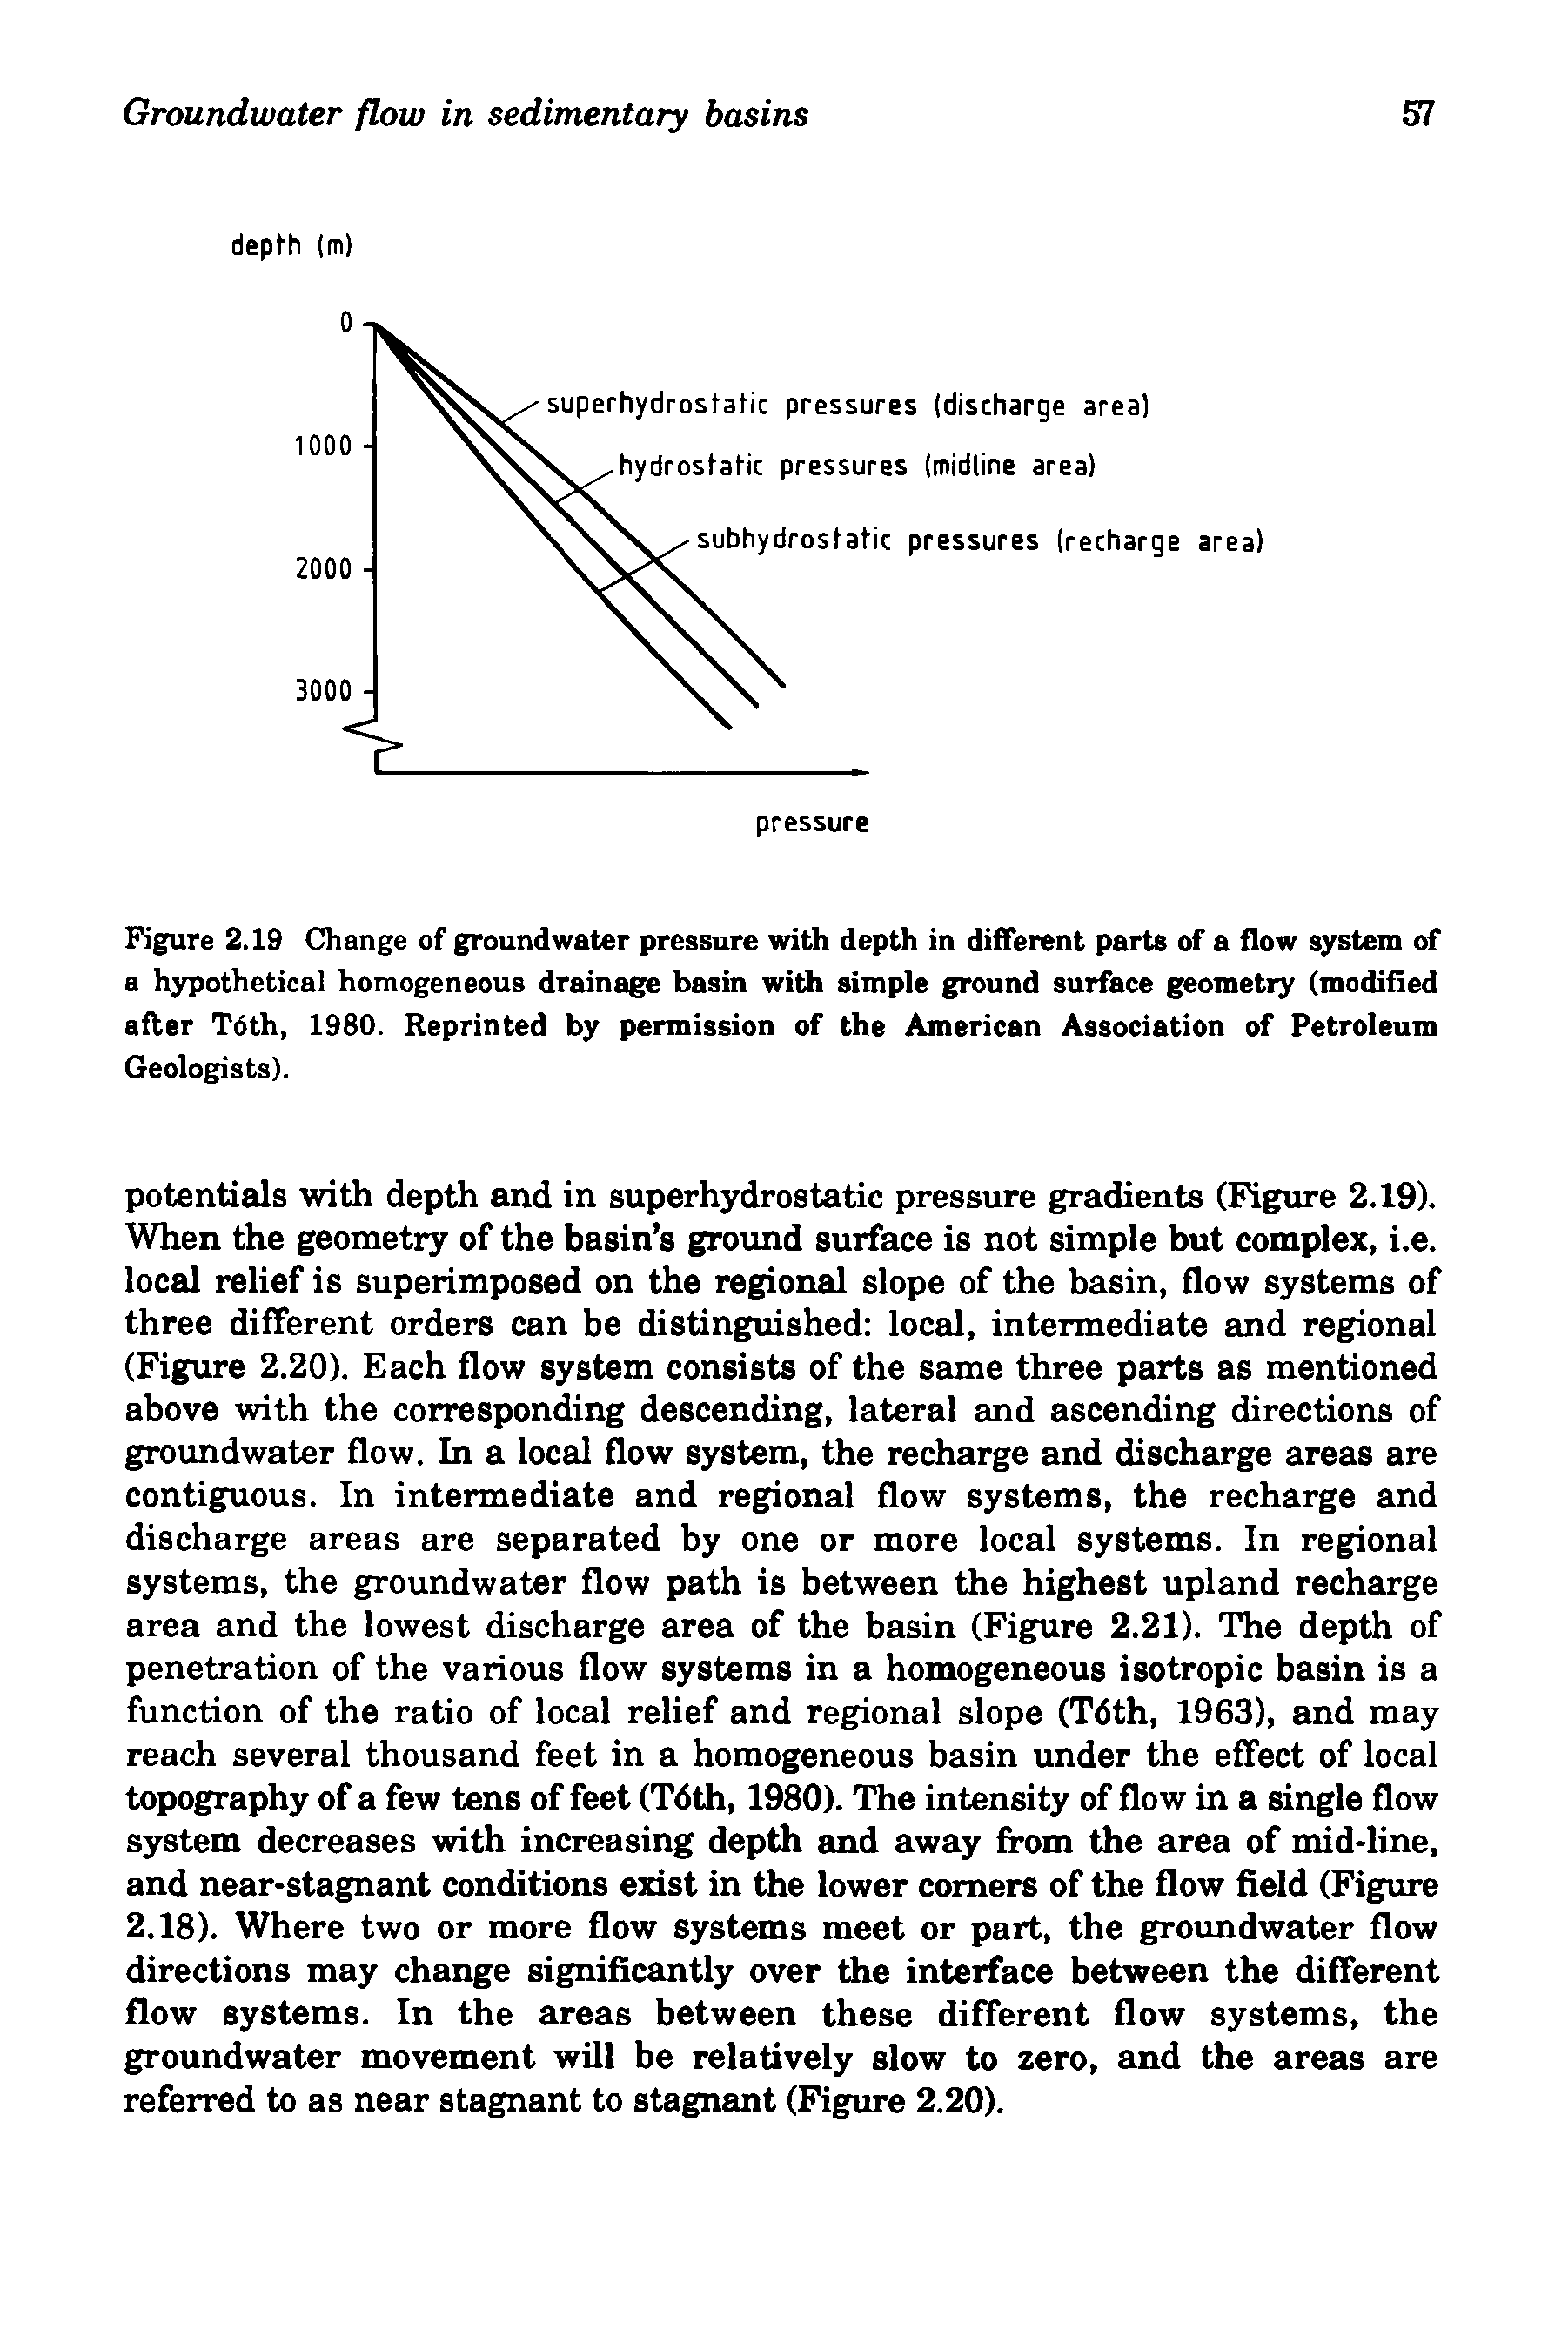 Figure 2.19 Change of groundwater pressure with depth in different parts of a flow system of a hypothetical homogeneous drainage basin with simple ground surface geometry (modified after T6th, 1980. Reprinted by permission of the American Association of Petroleum Geologists).